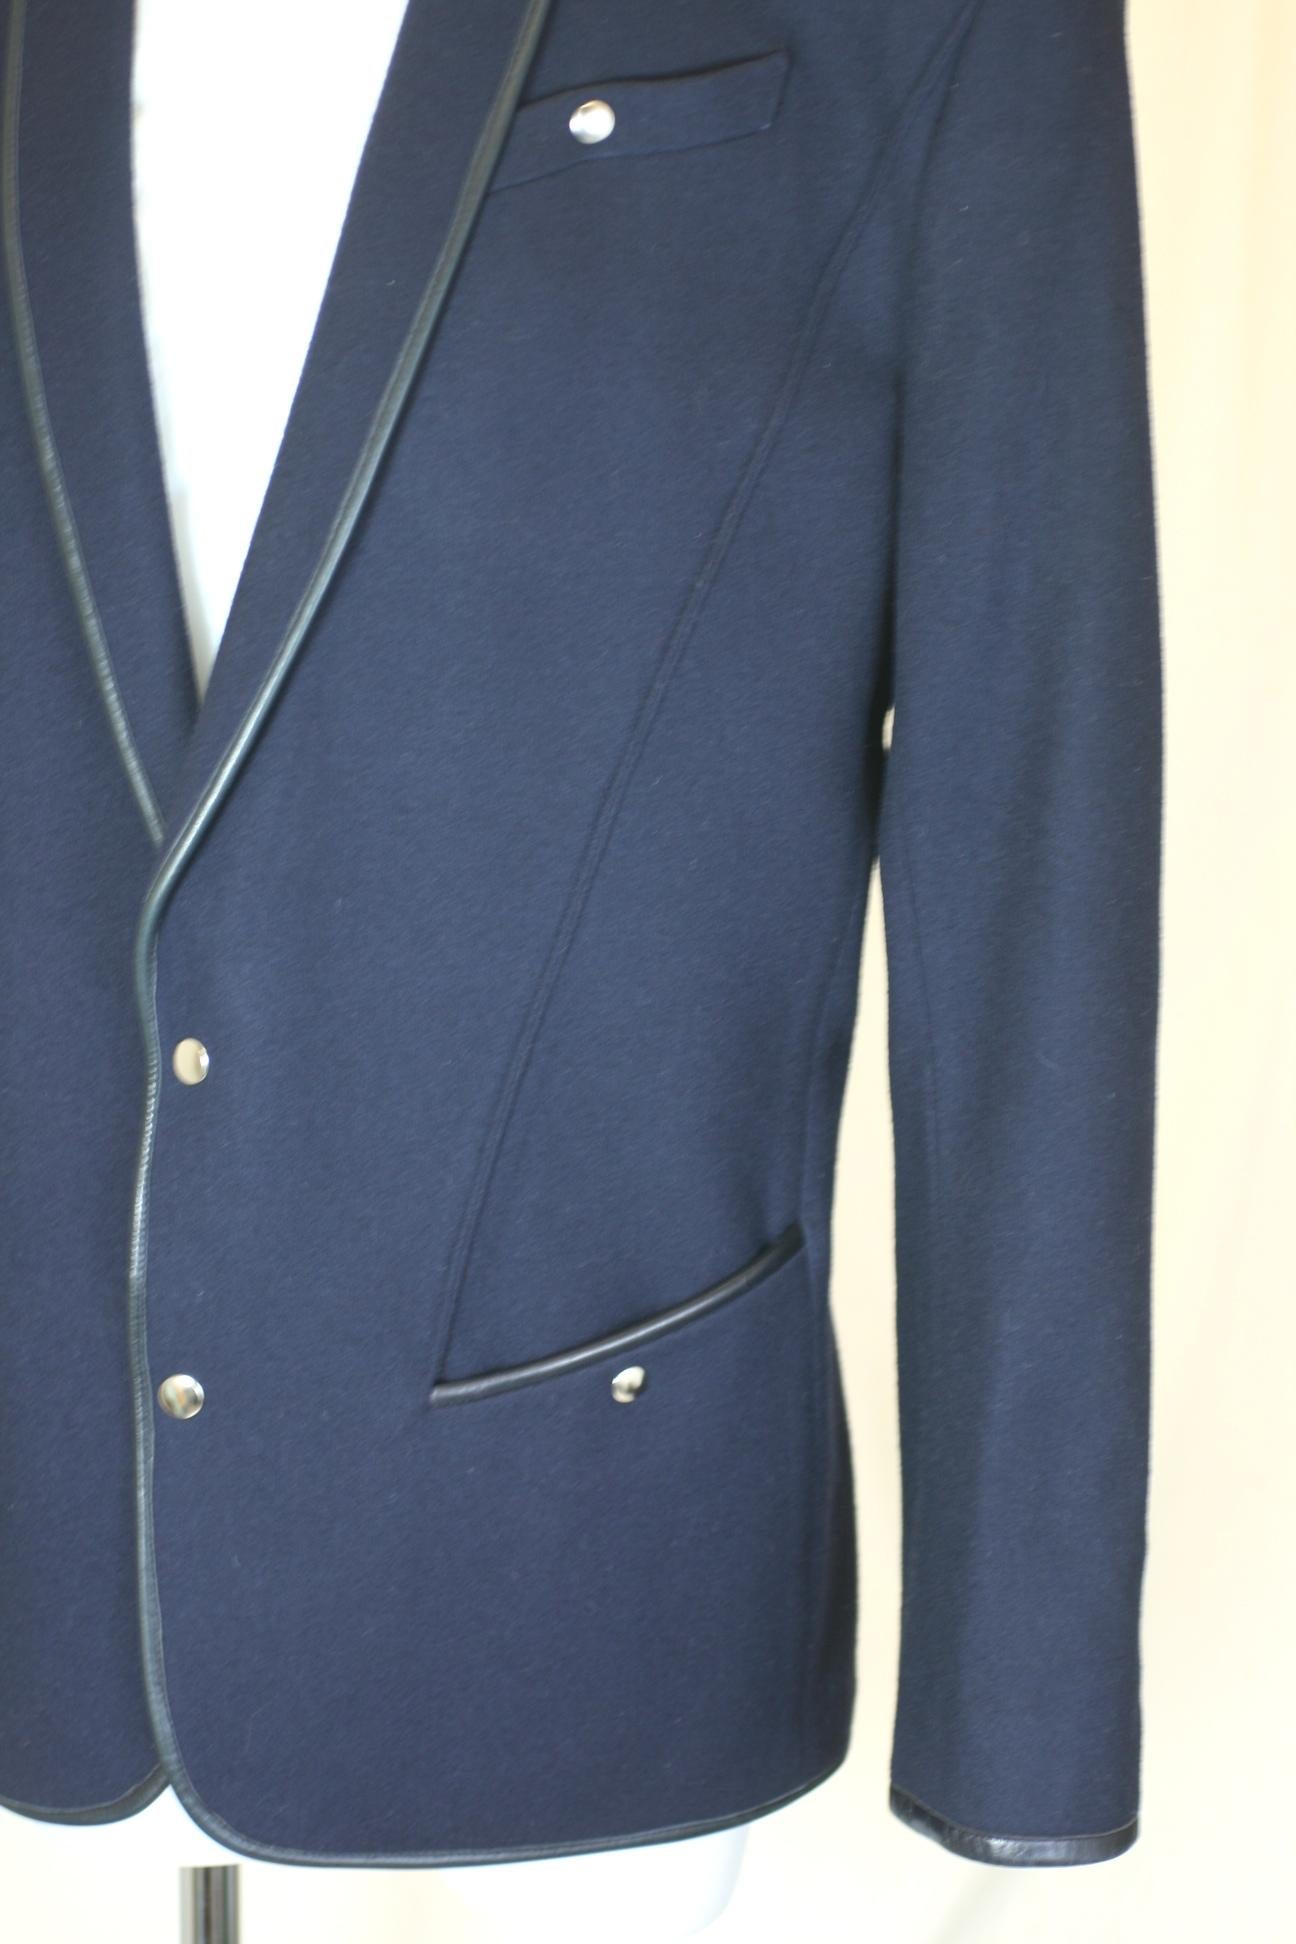 Thierry Mugler Iconic navy wool melton and leather trimmed blazer from the 1980's. Strong shouldered with tapering lines executed with Mugler's razor sharp cutting.  
Excellent condition. France 1980's. Snap closures. 
This model is also in the